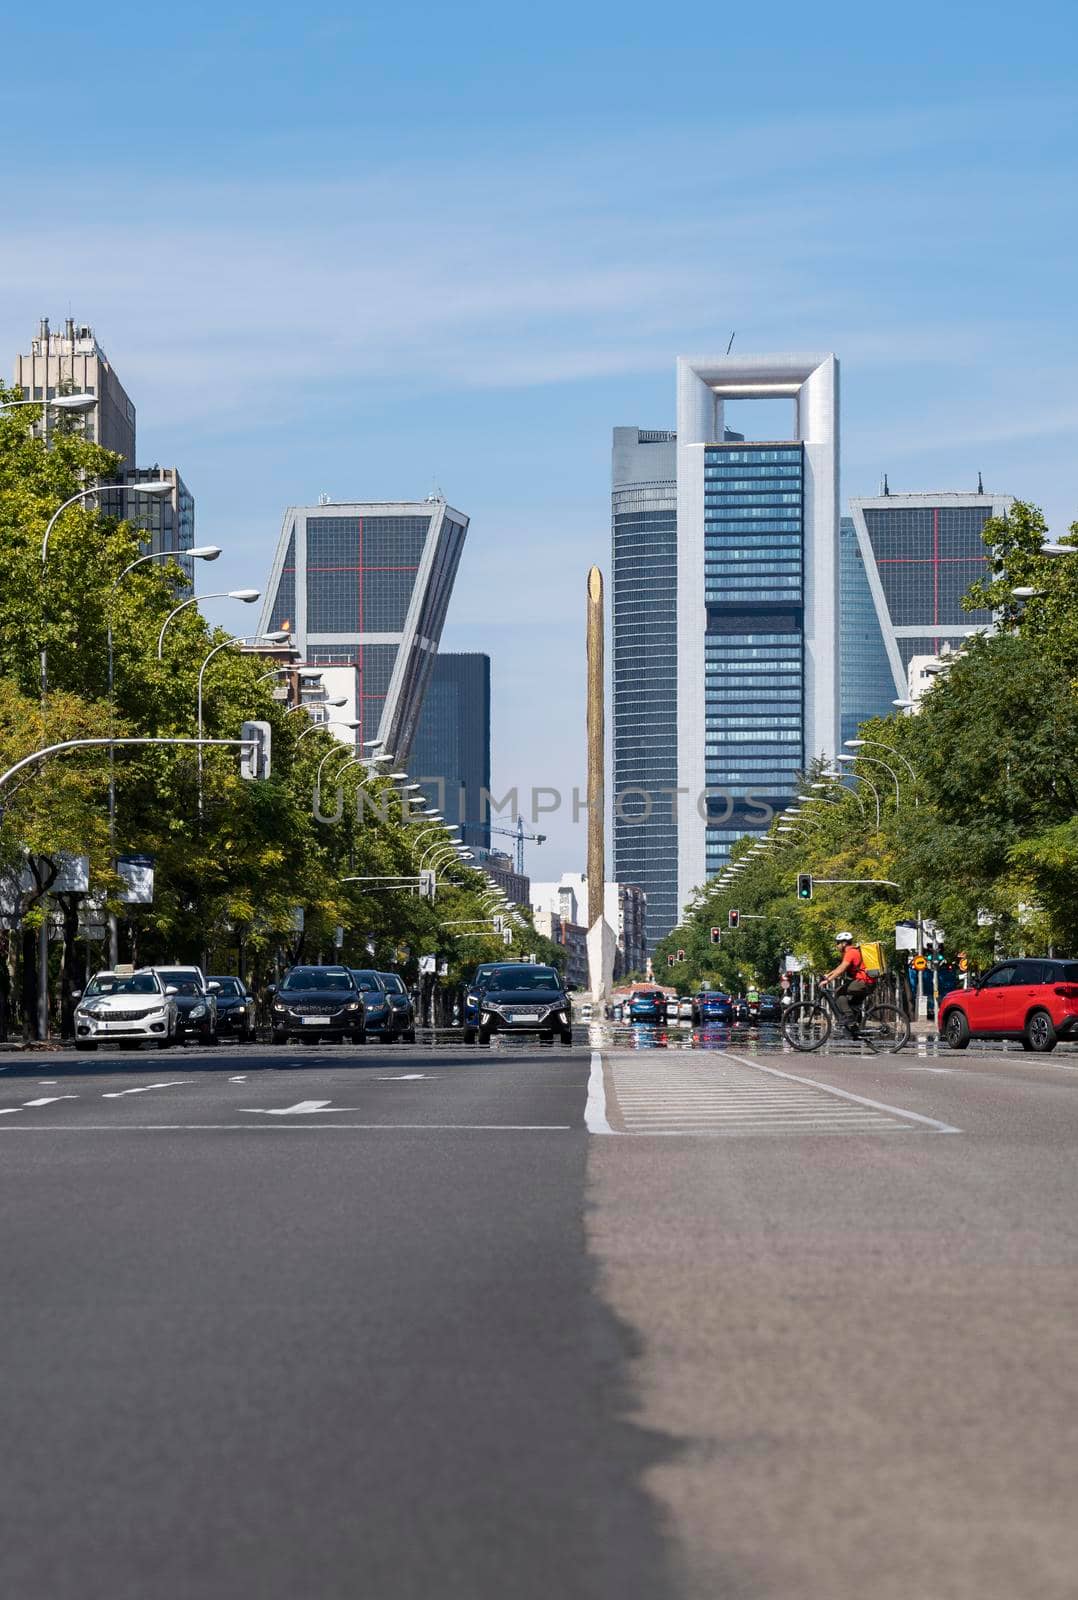 View of Madrid city road with skyscrapers in the background. It is the main avenue in the city full of traffic.